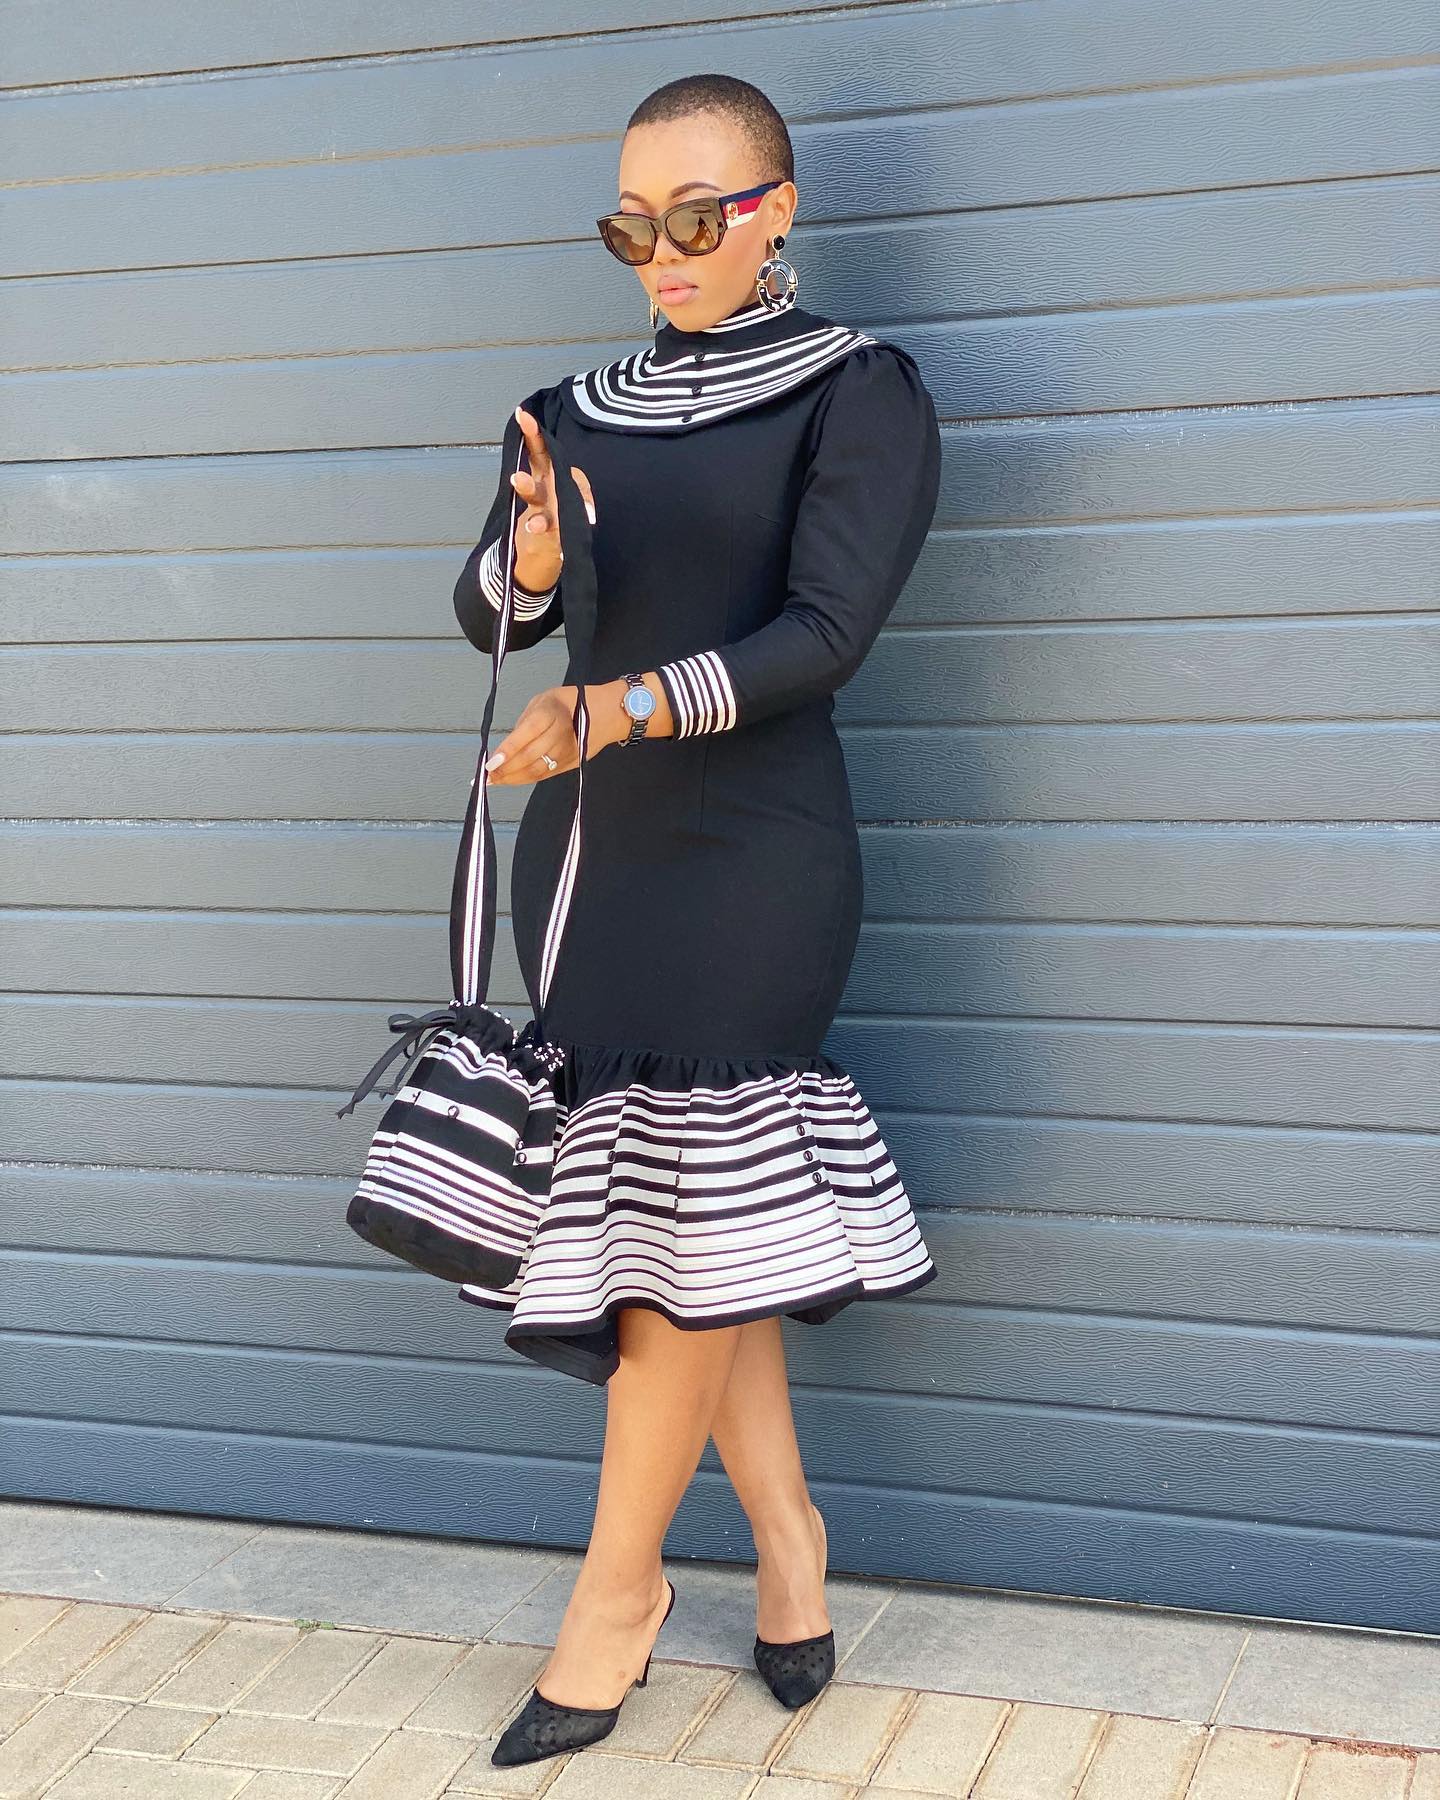 Wearing Xhosa Heritage: Dresses that Sing with Cultural Pride 19